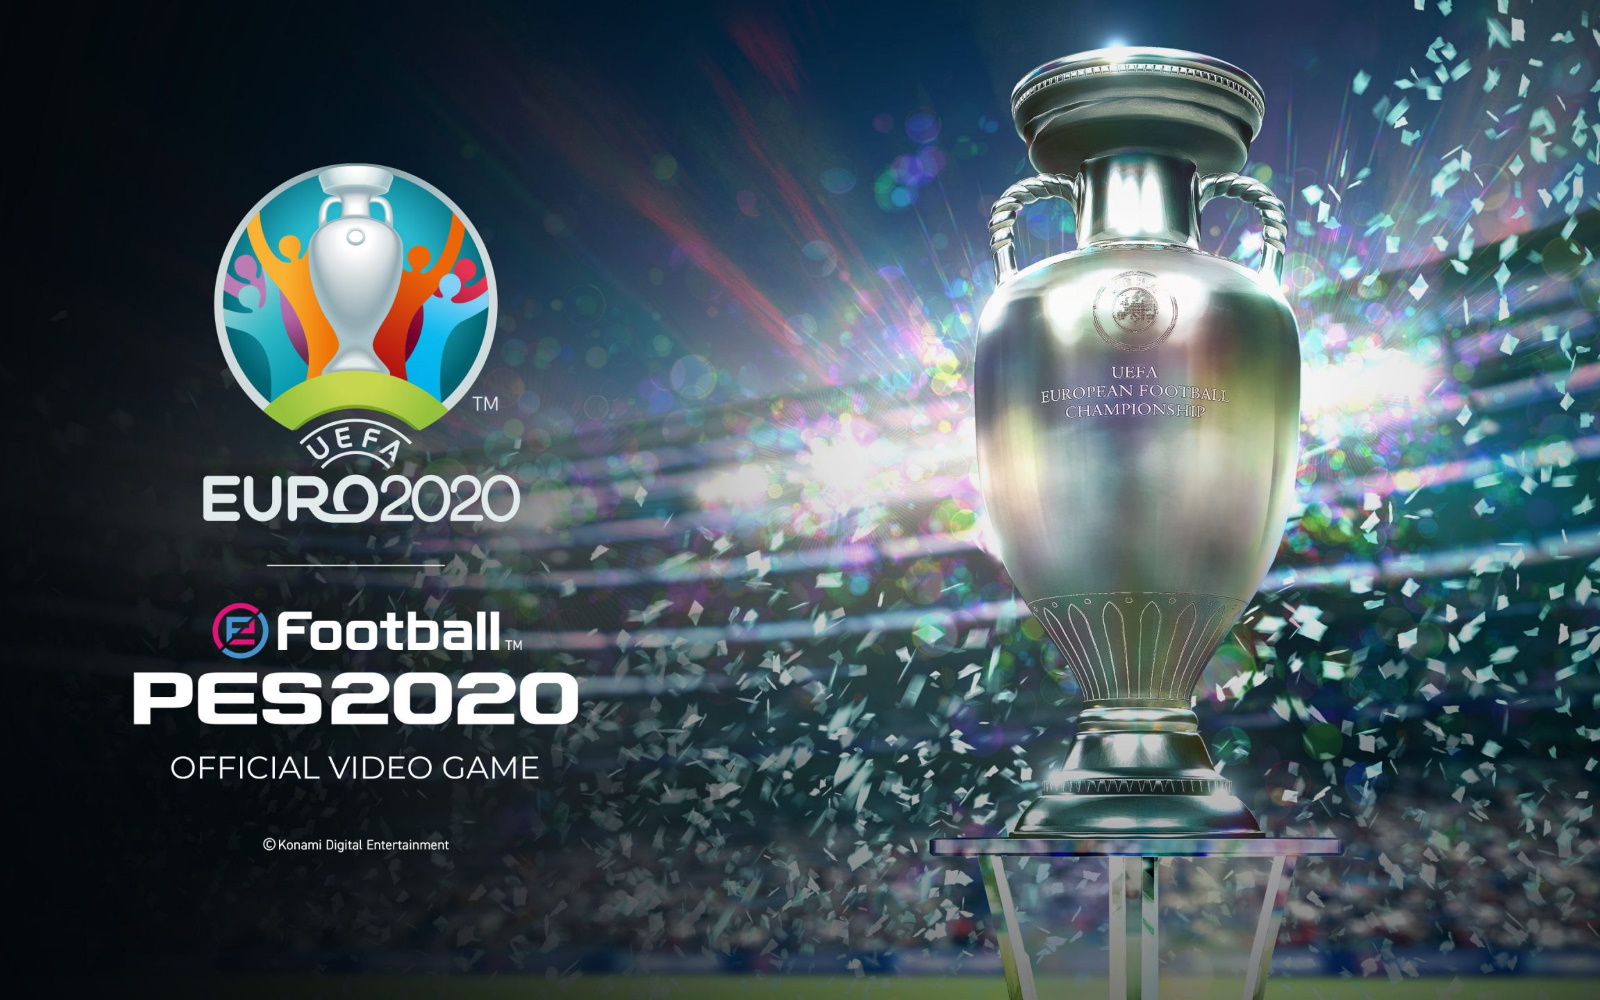 Free Euro 2020 Update Now Available in PES 2020